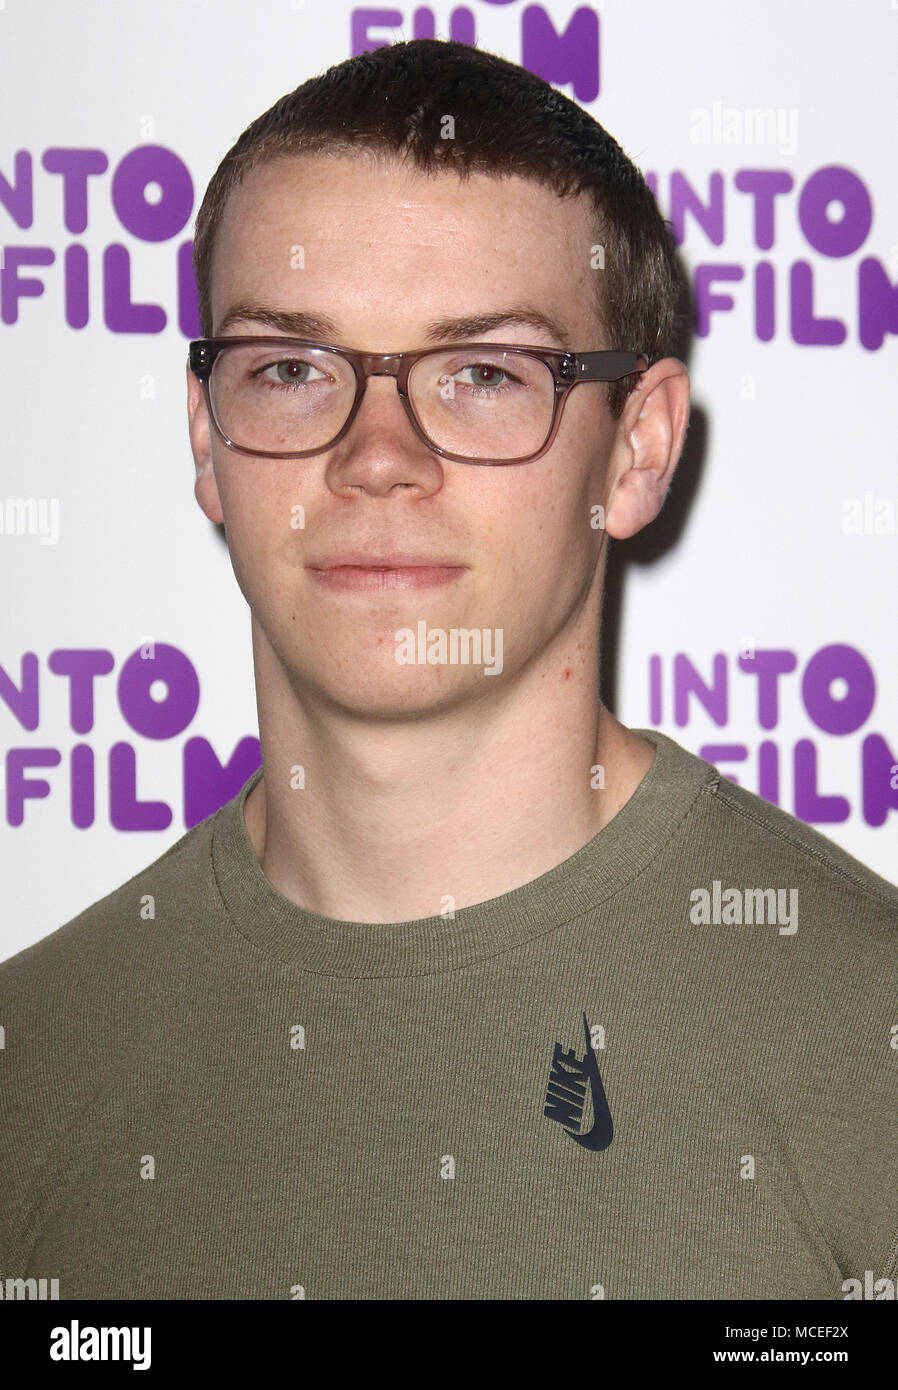 Mar 13, 2018 - Will Poulter attending Into Film Awards 2018, BFI Southbank  in London, England, UK Stock Photo - Alamy